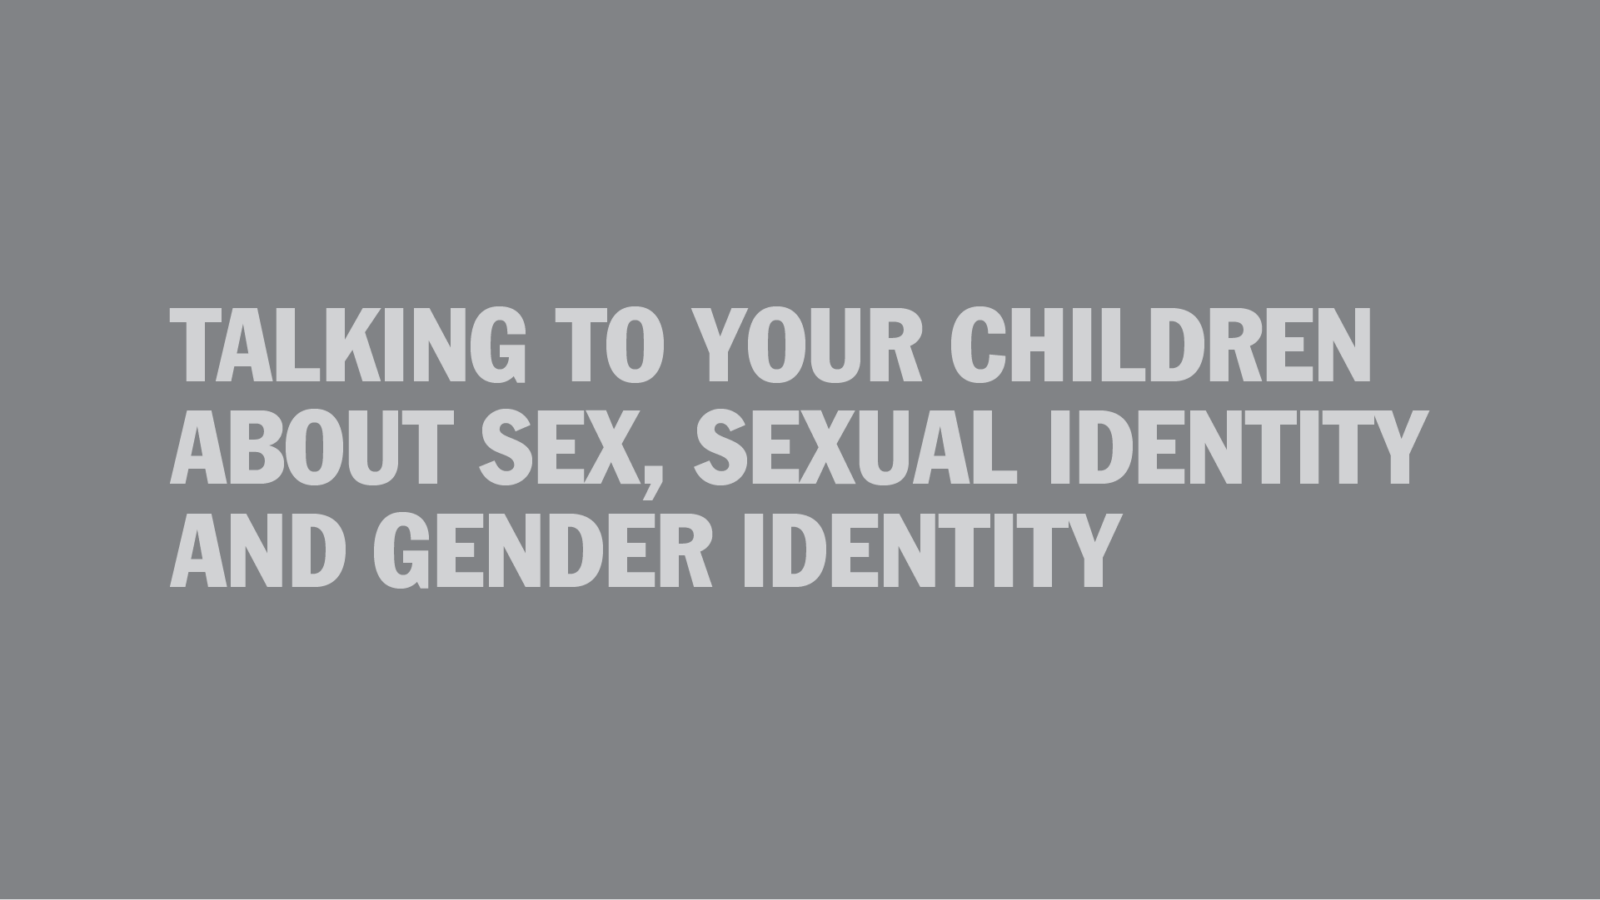 Talking to Your Children about Sex, Sexual Identity and Gender Identity